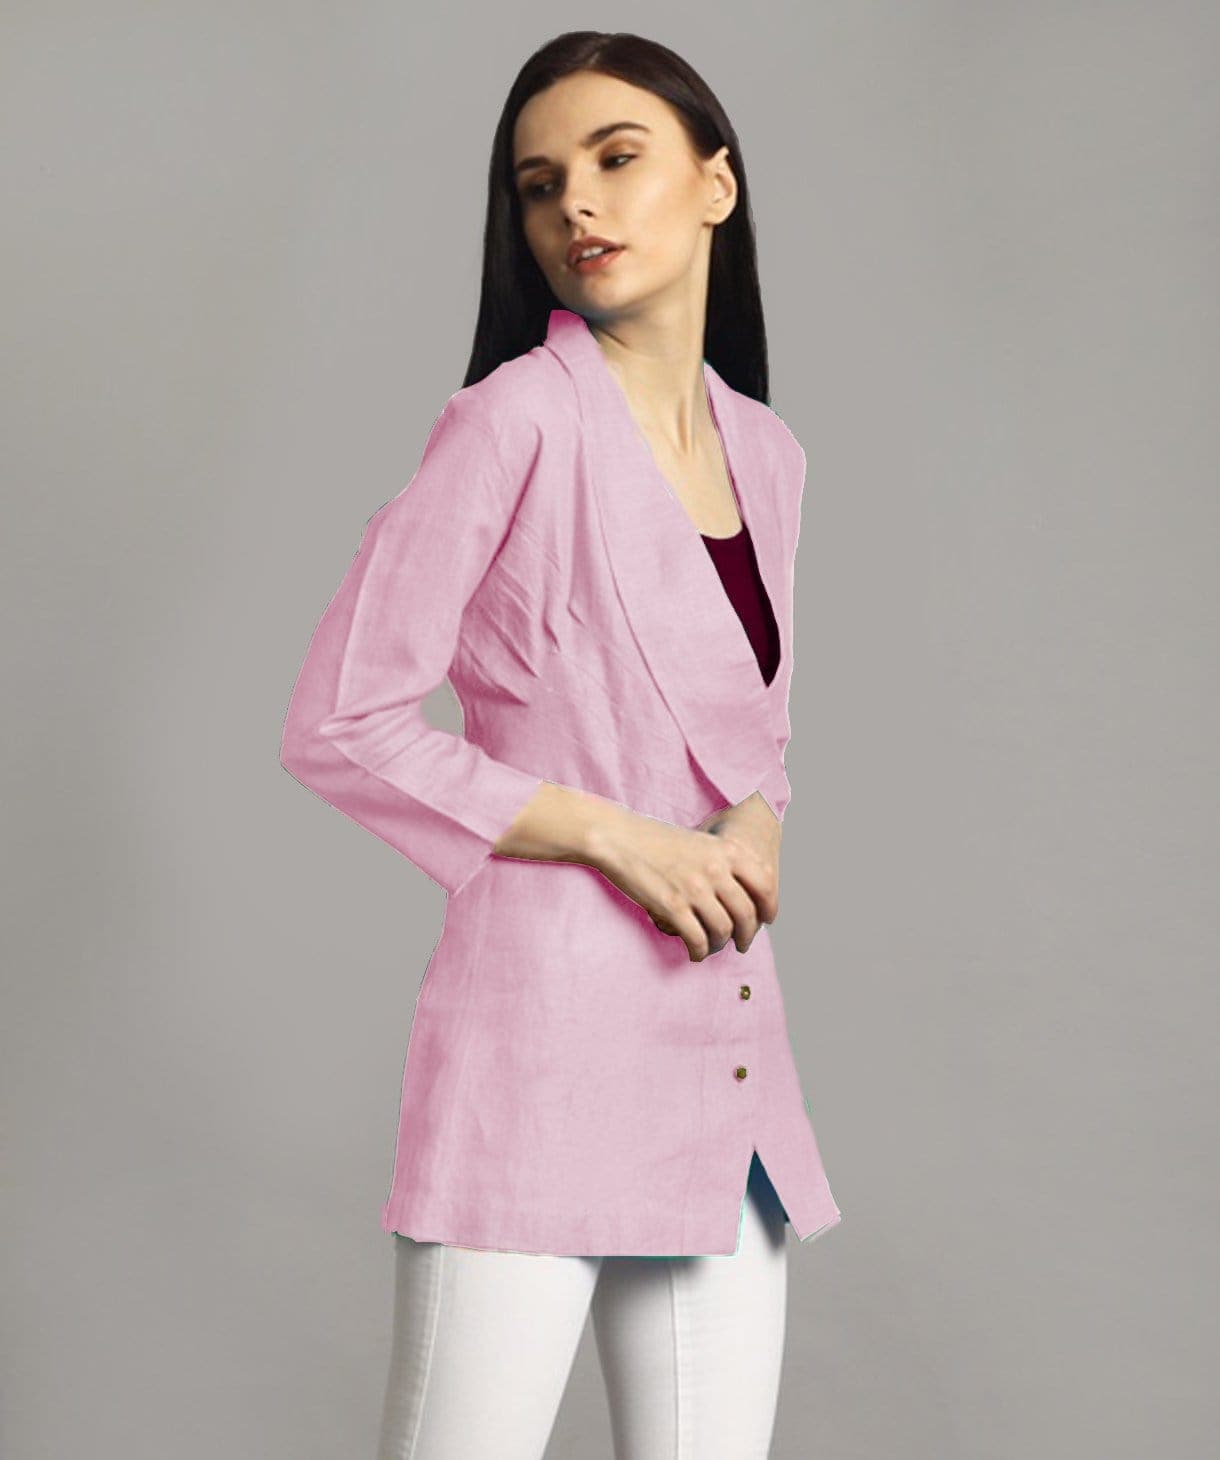 Baby Pink Linen Jacket Style Tunic - Uptownie